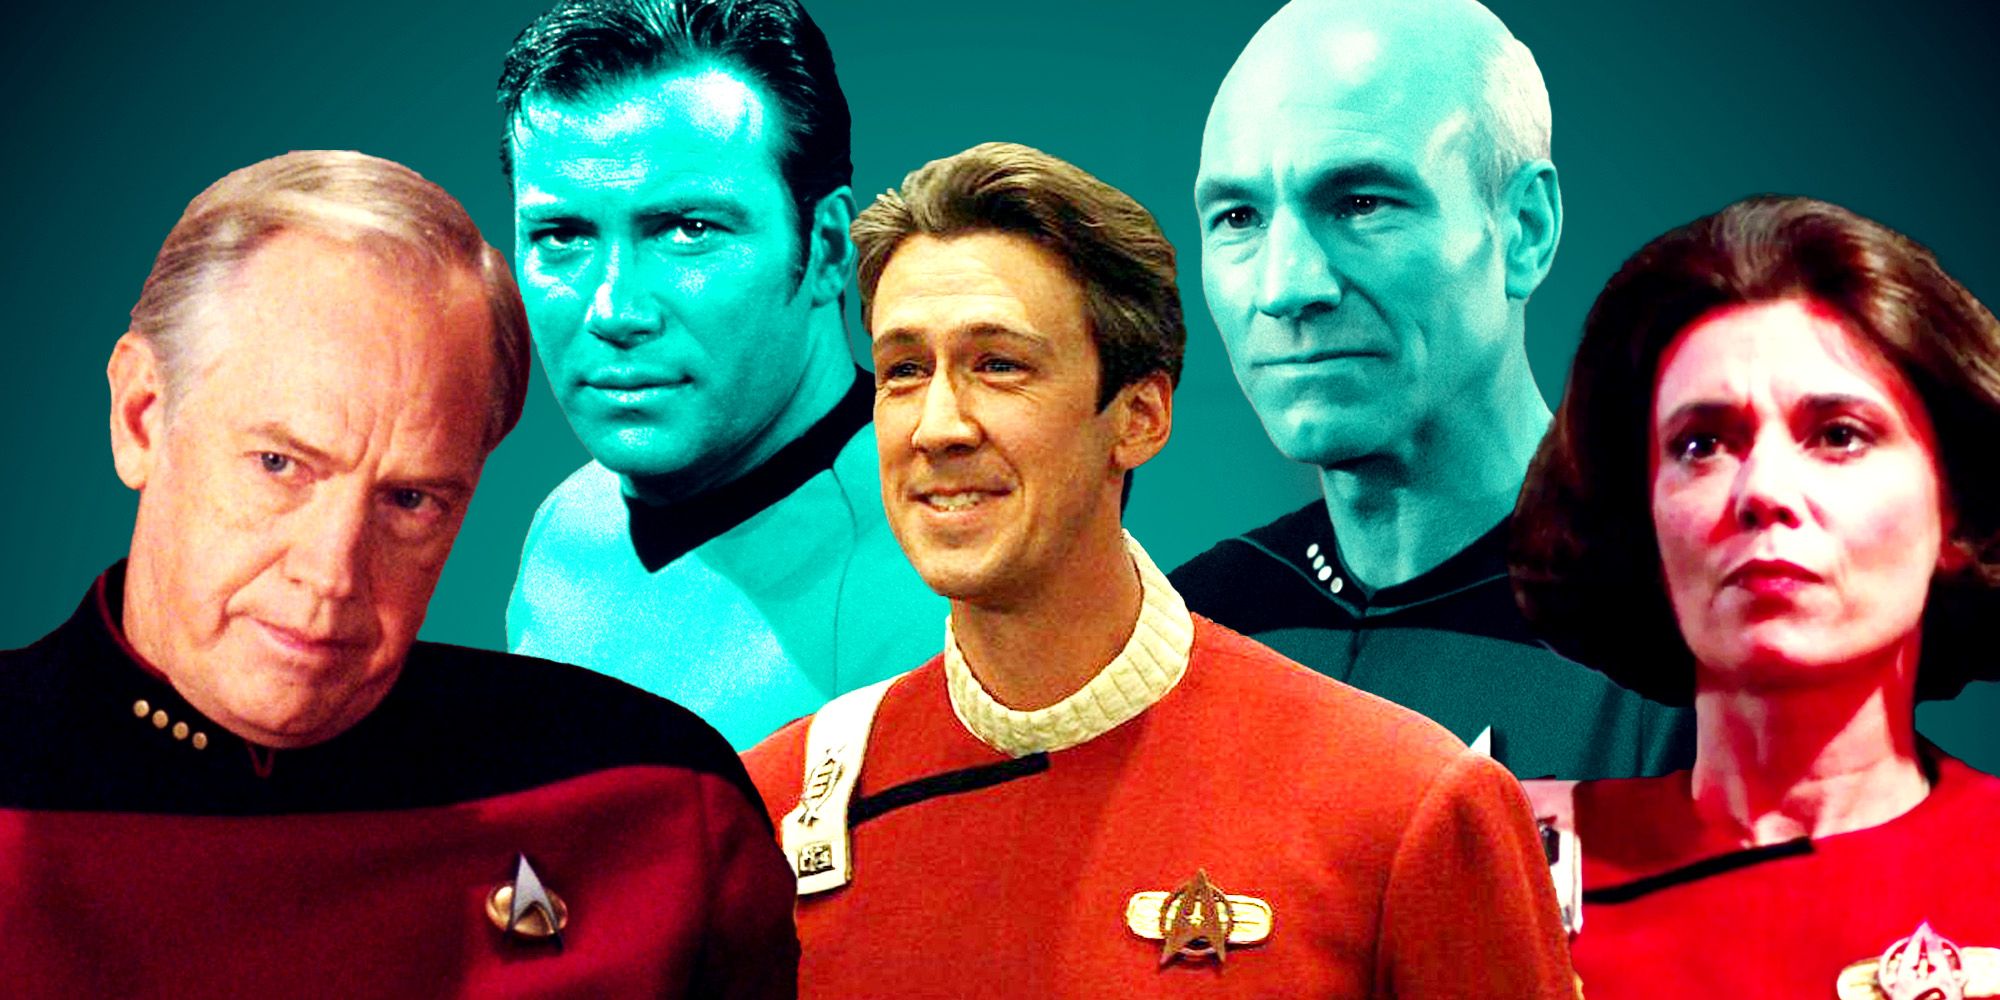 Kirk, Picard & Pike Are Great But About These Enterprise Star Trek Captains?